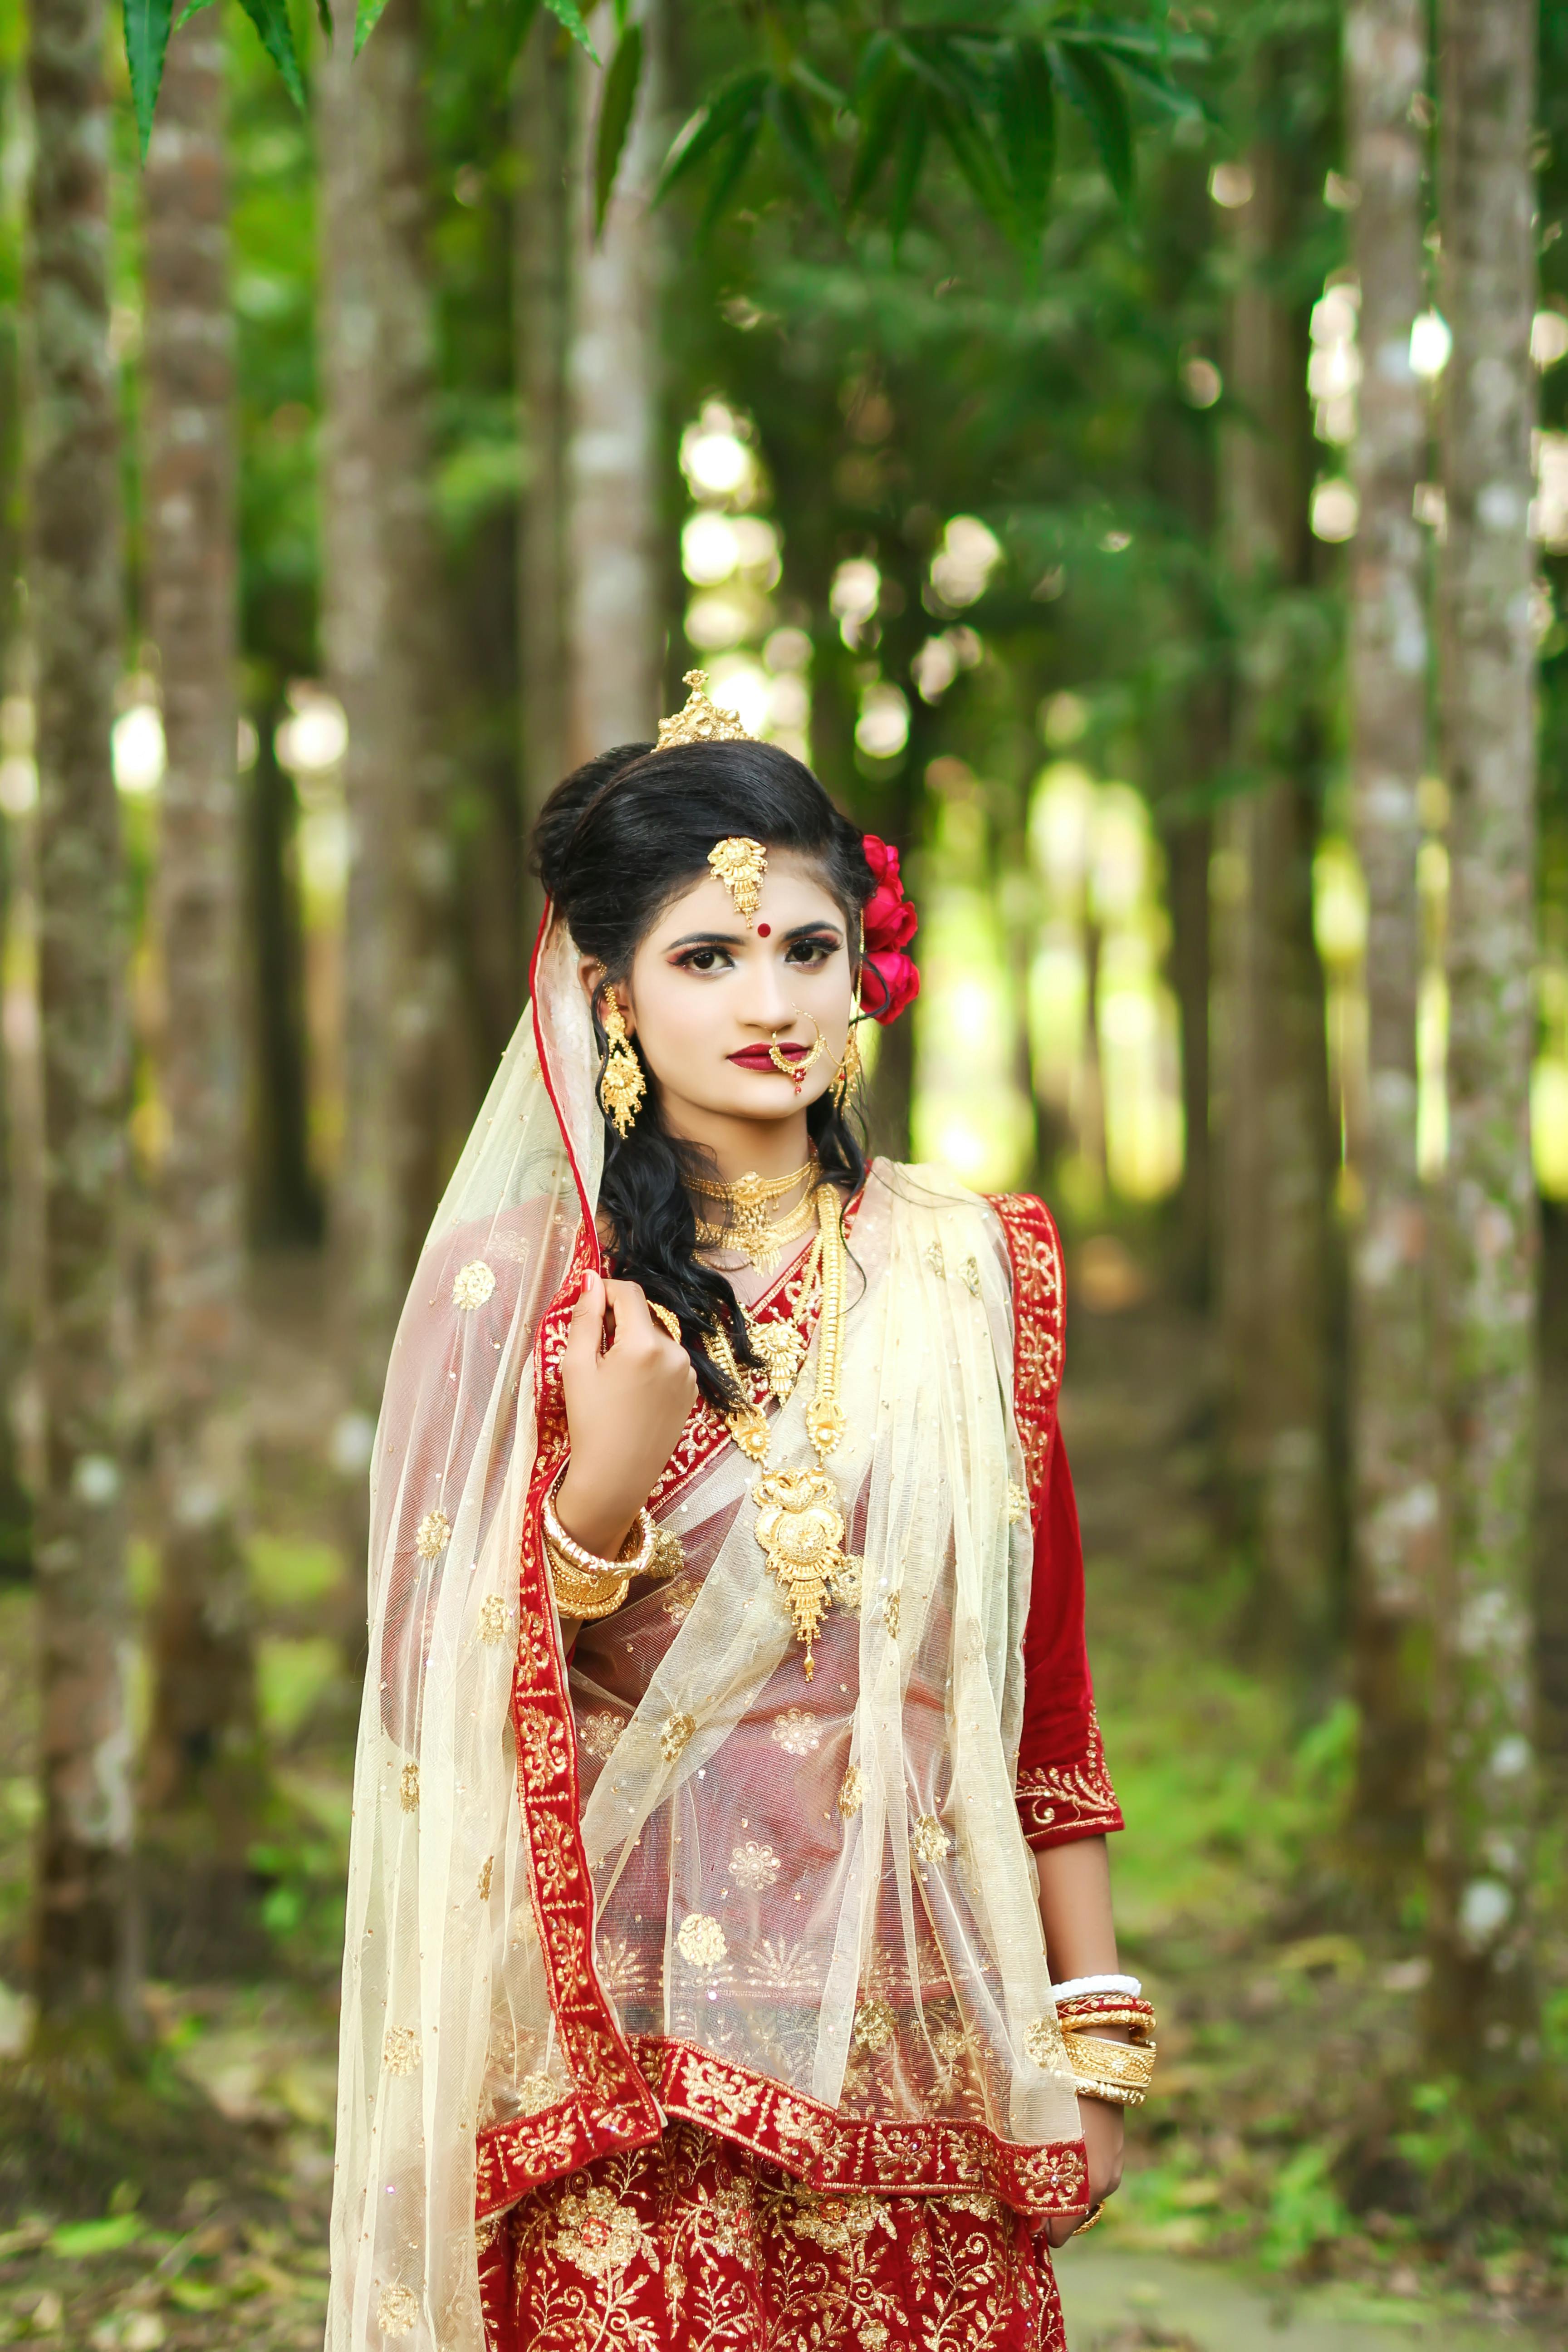 8,049 Indian Bride Posing Images, Stock Photos, 3D objects, & Vectors |  Shutterstock